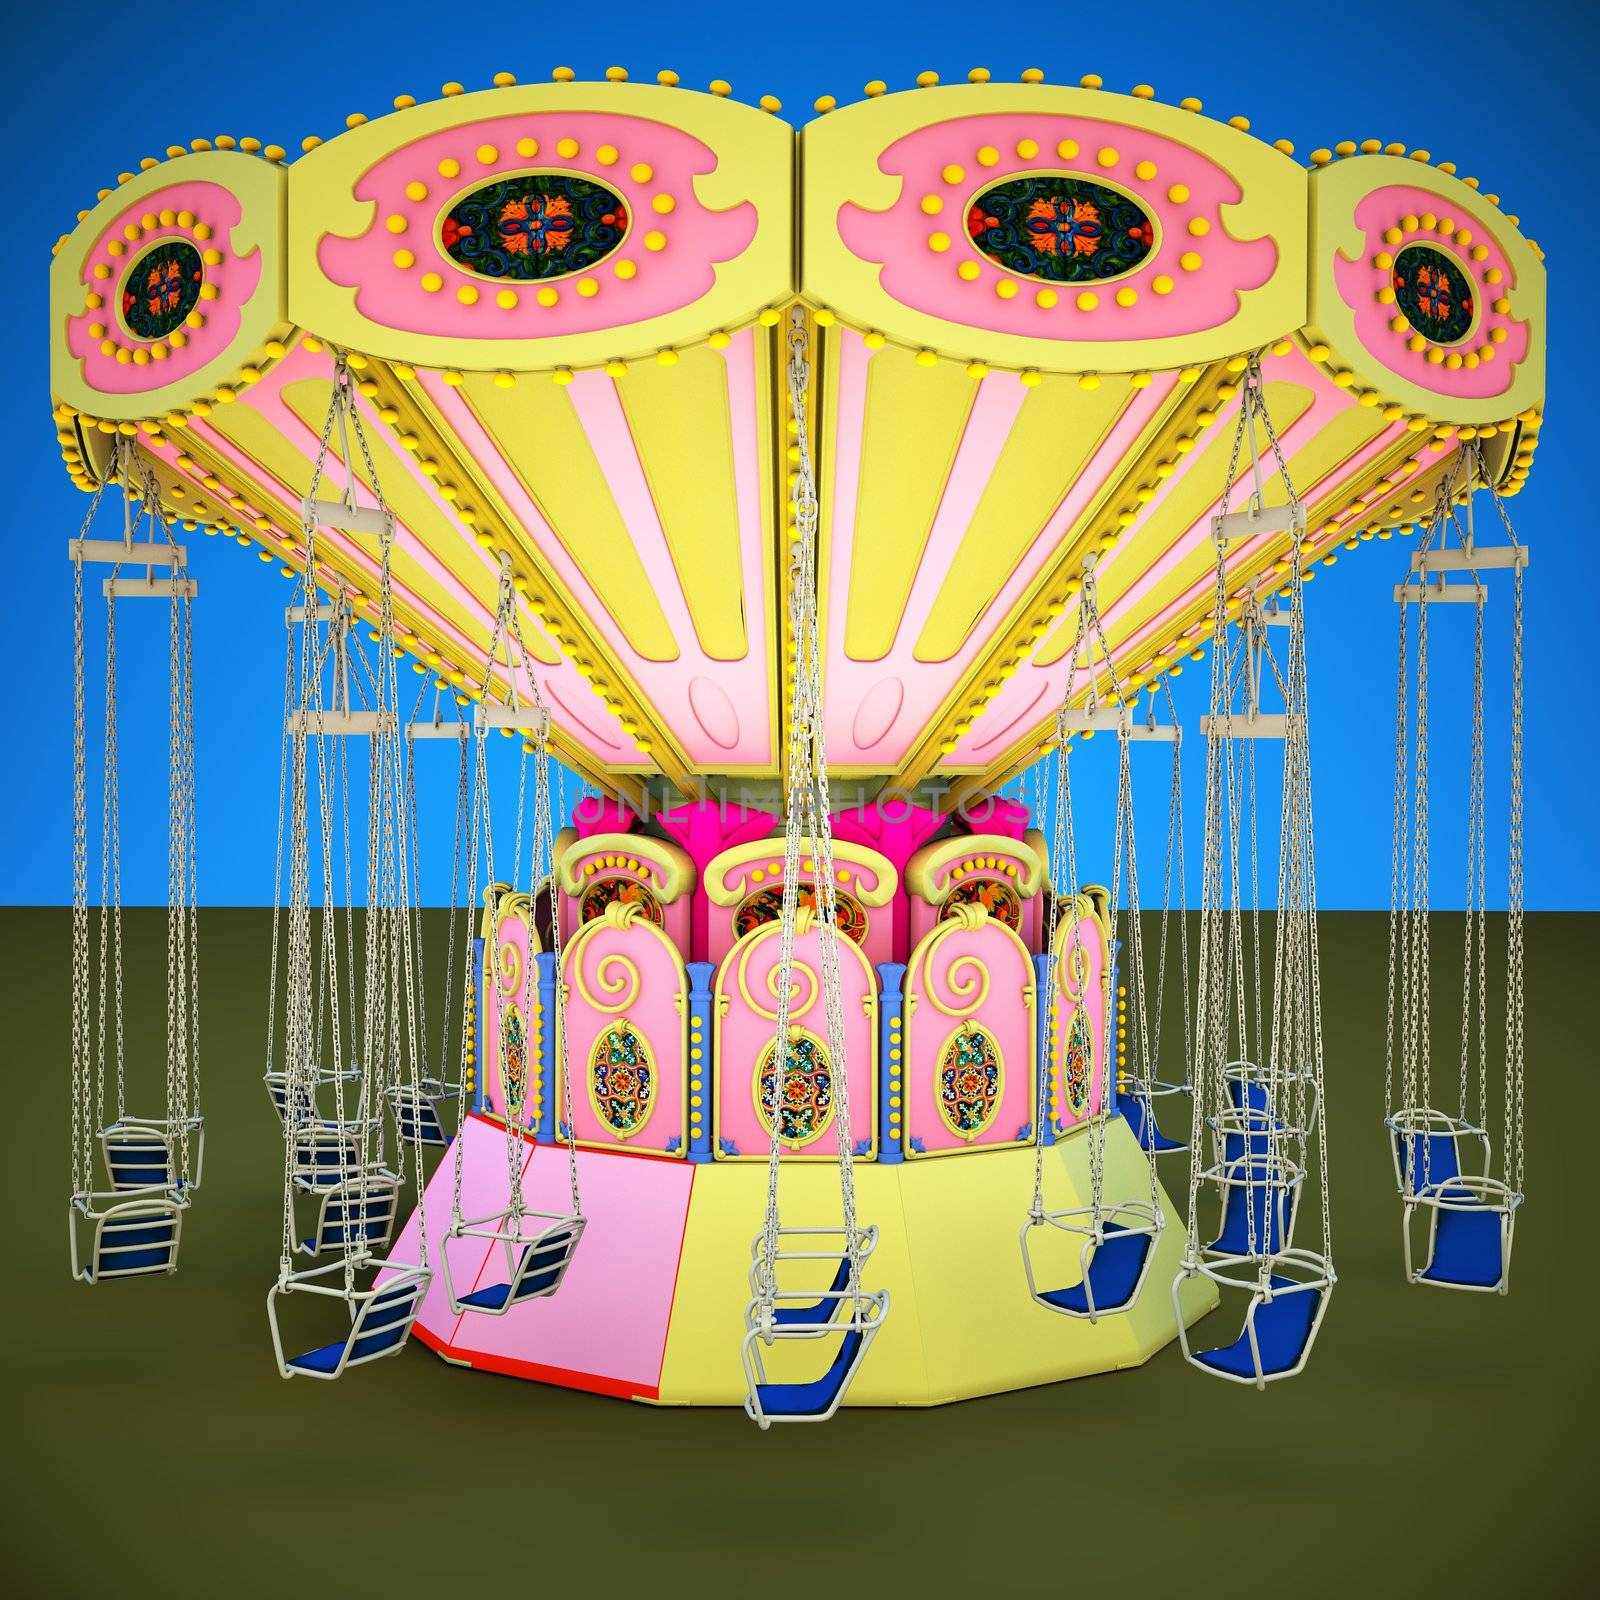 Fairground Carousel by andromeda13